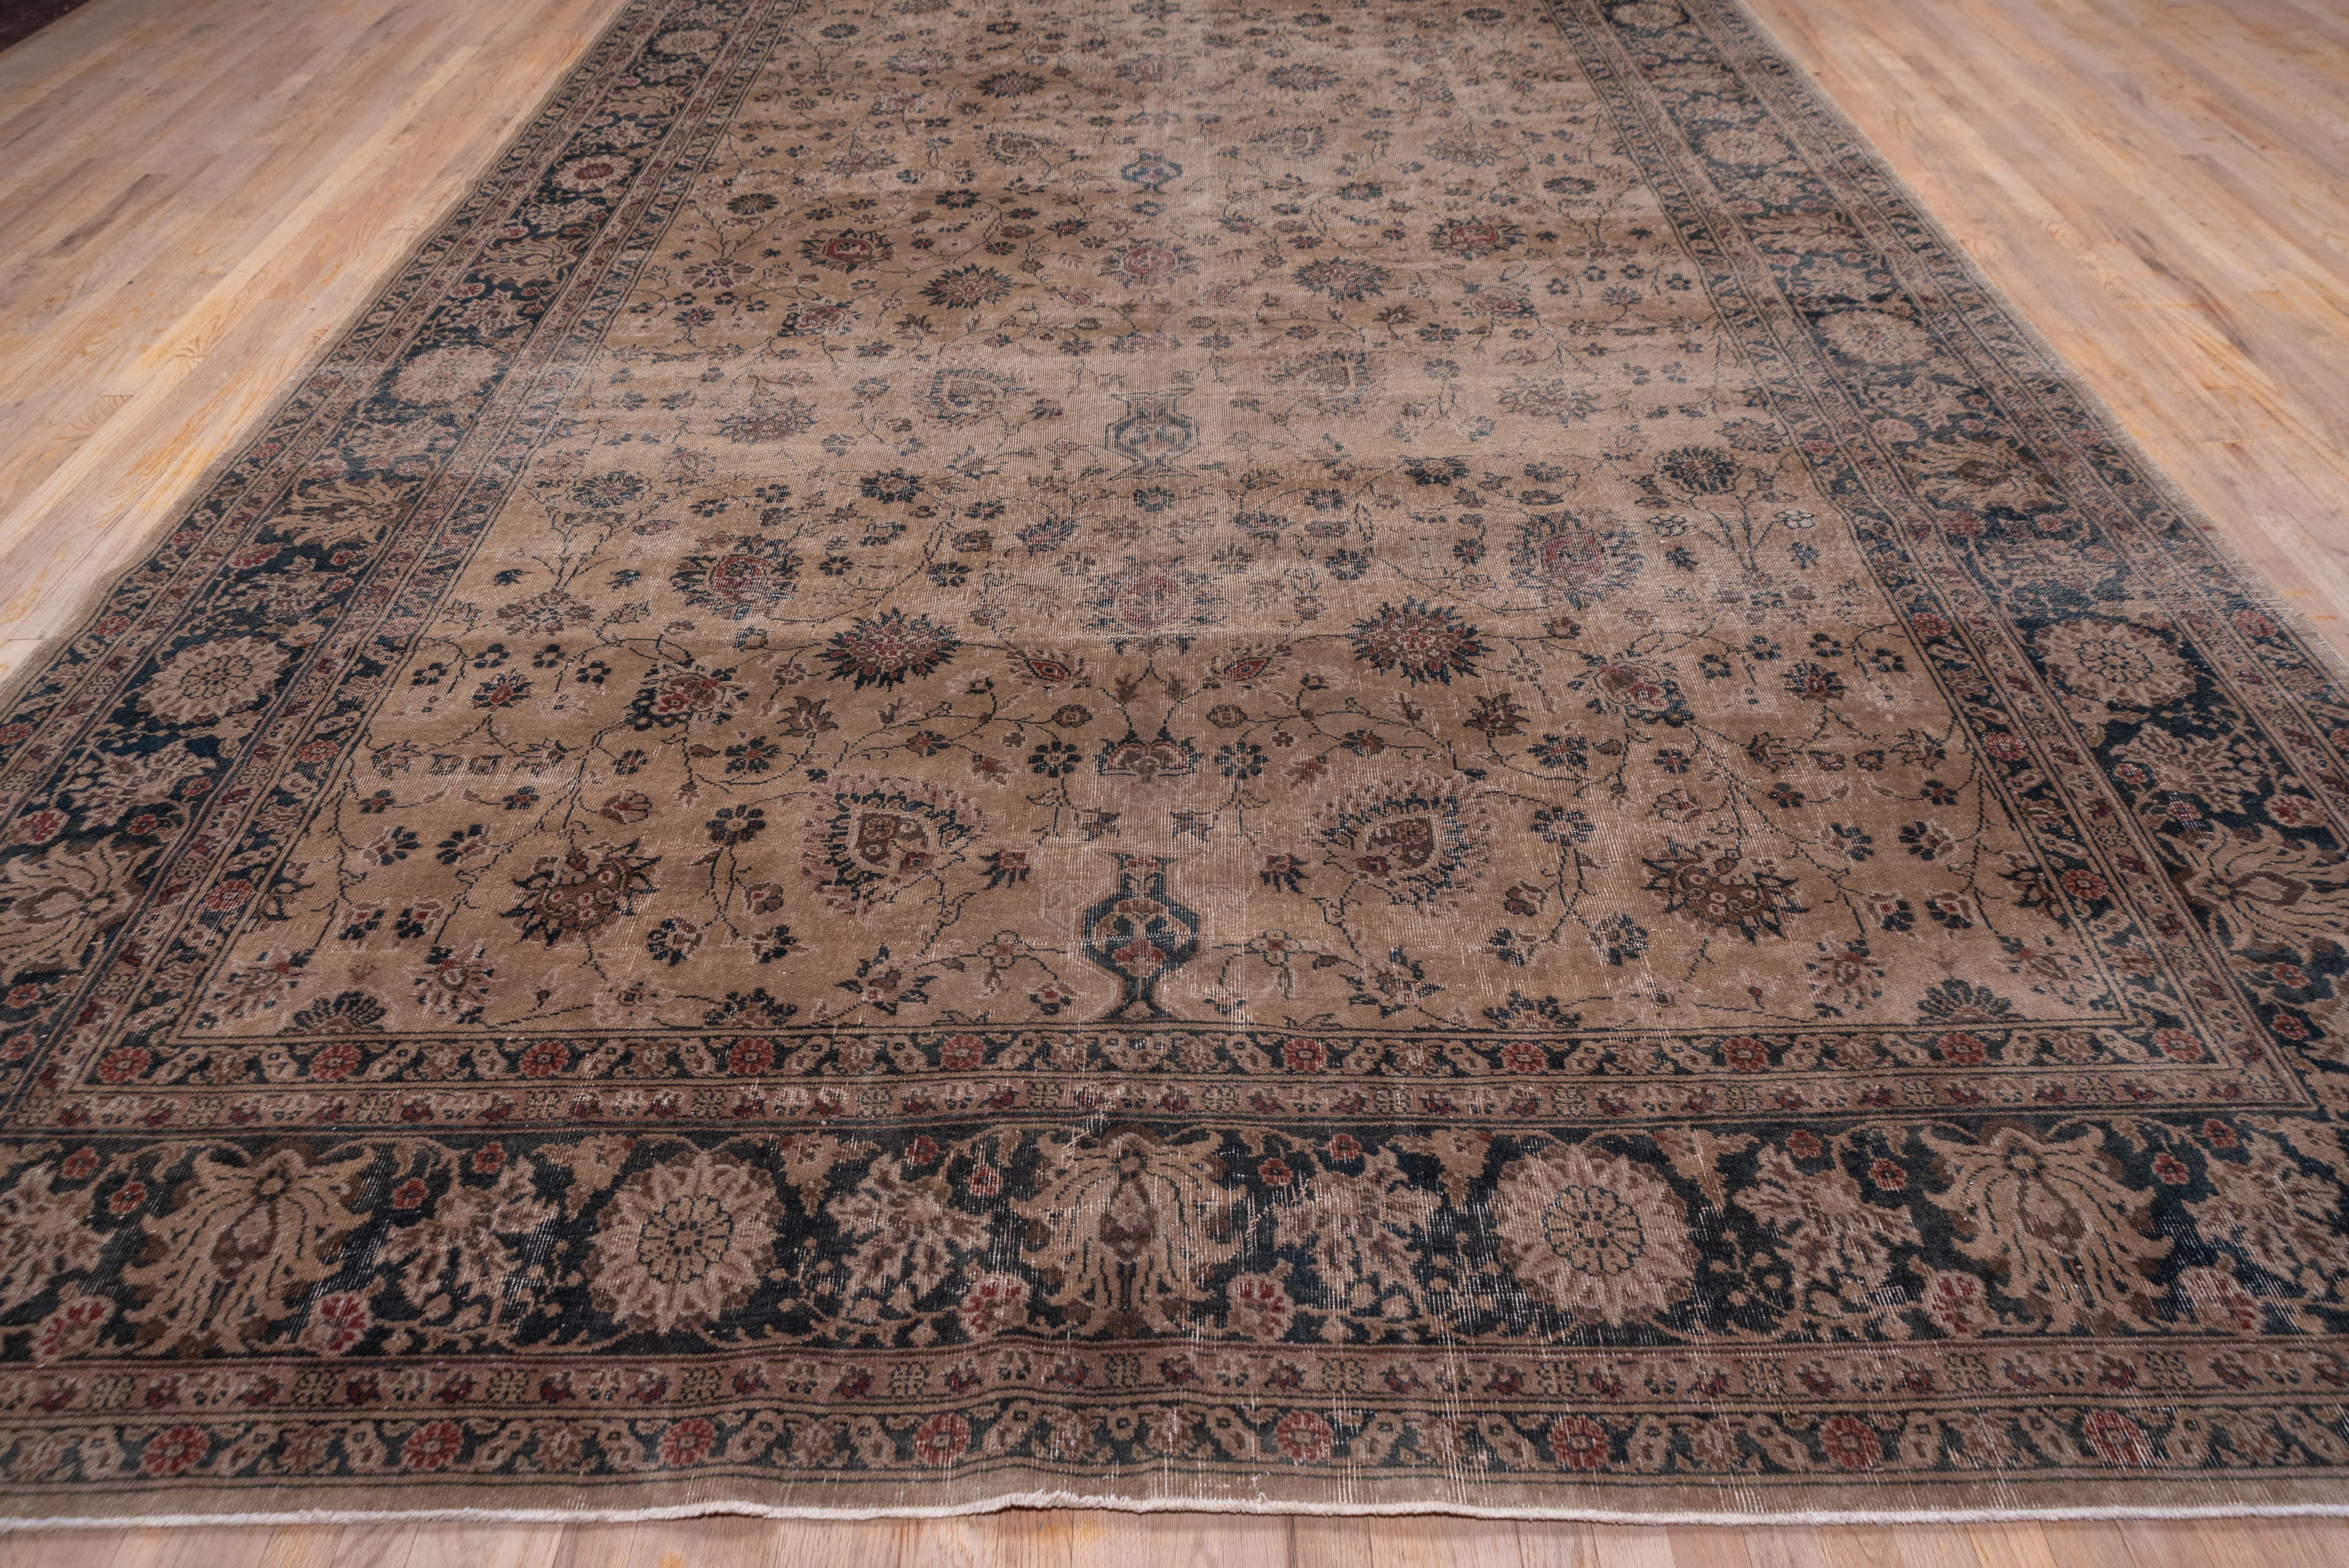 The light brown field is patterned with a Persianate all-over palmette, vase and stem pattern. The style continues into the red-brown border of long-petal palmettes and corner rosettes.